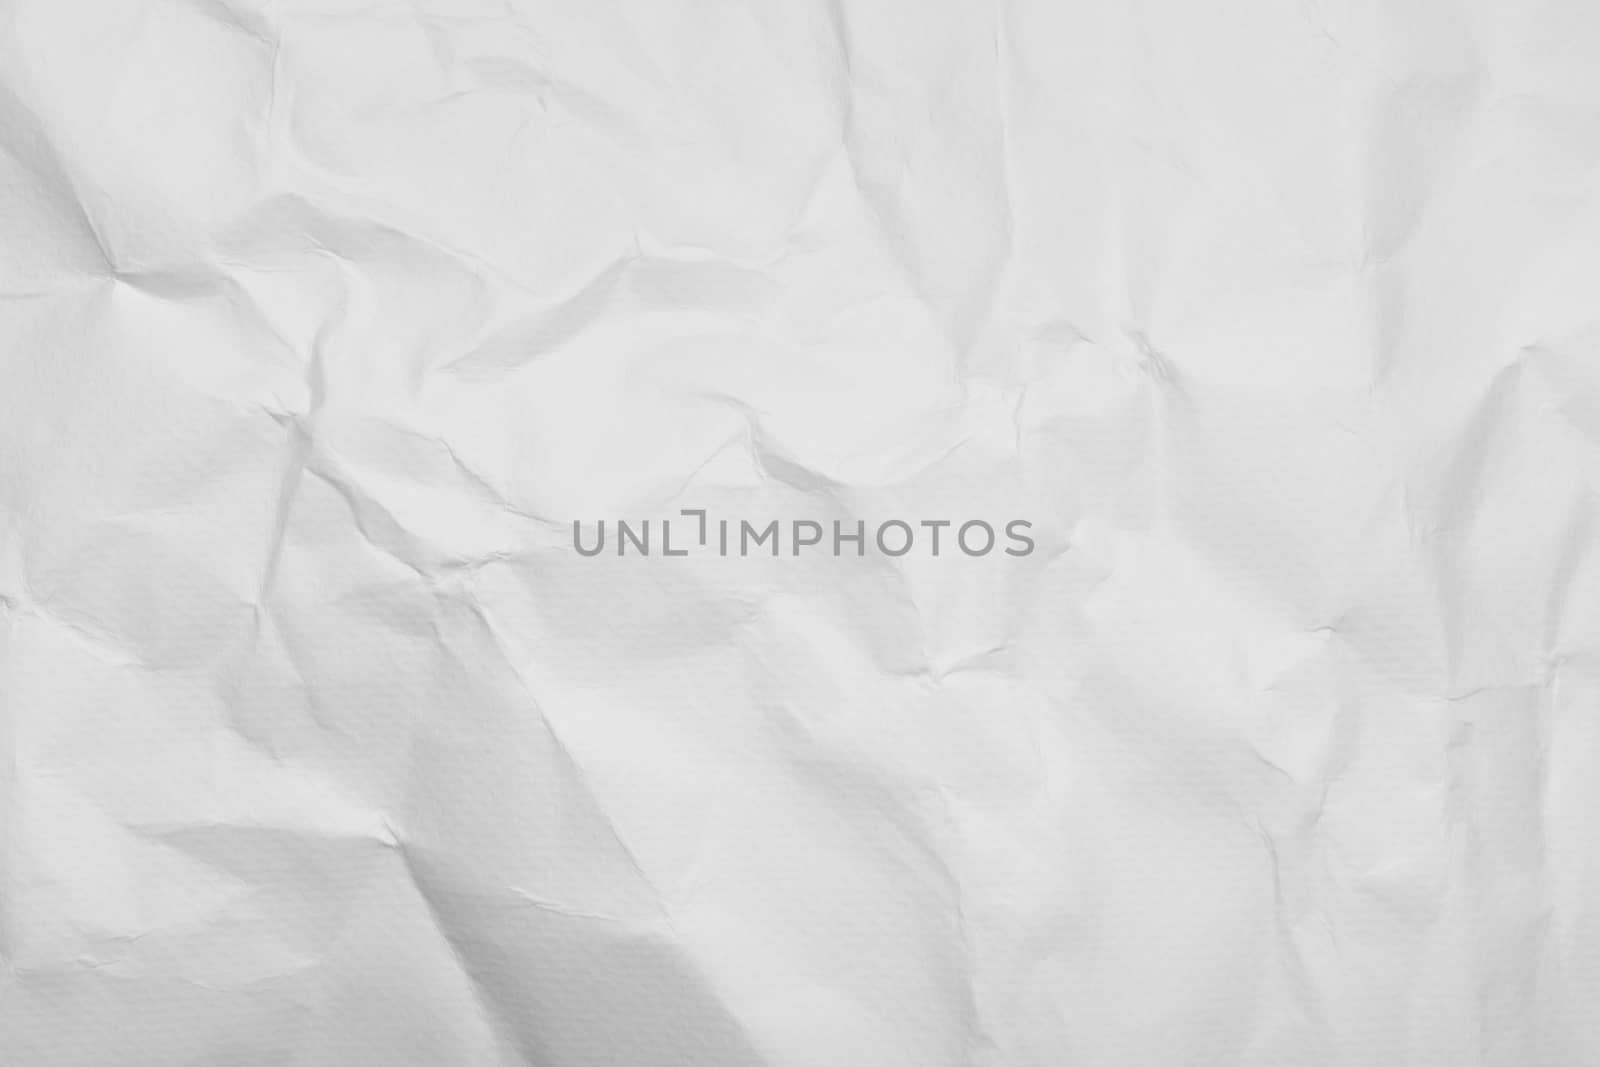 Watercolor white clumped Paper texture background, kraft paper horizontal with Unique design of paper, Soft natural paper style For aesthetic creative design